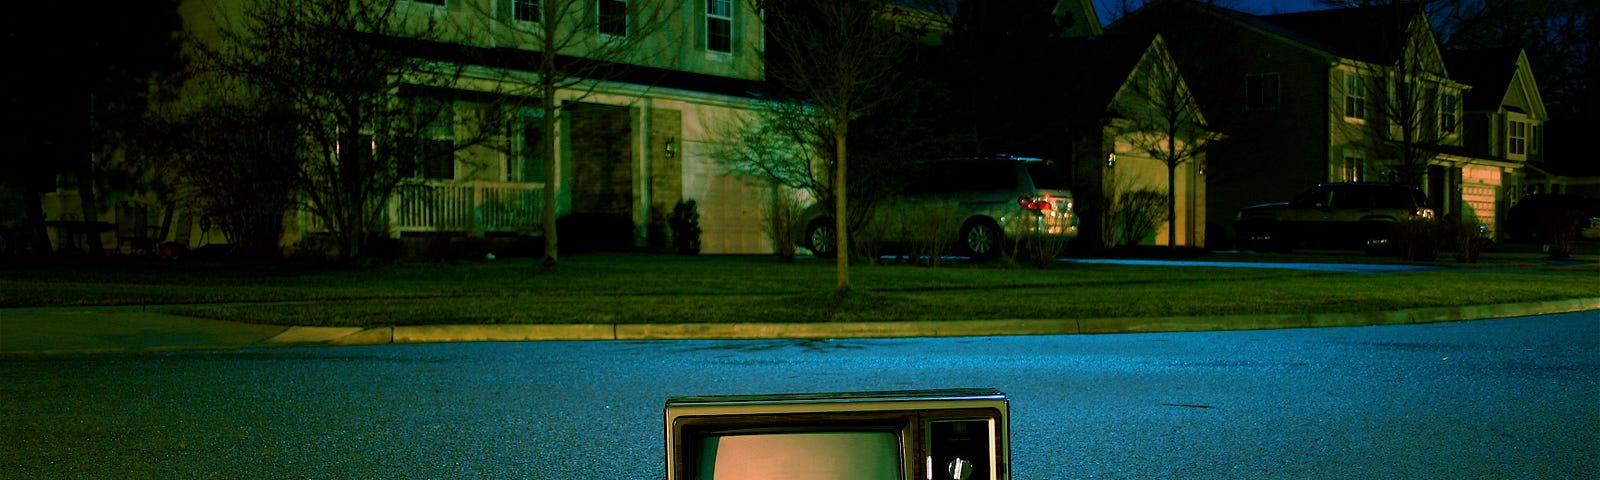 A television in the middle of a street.